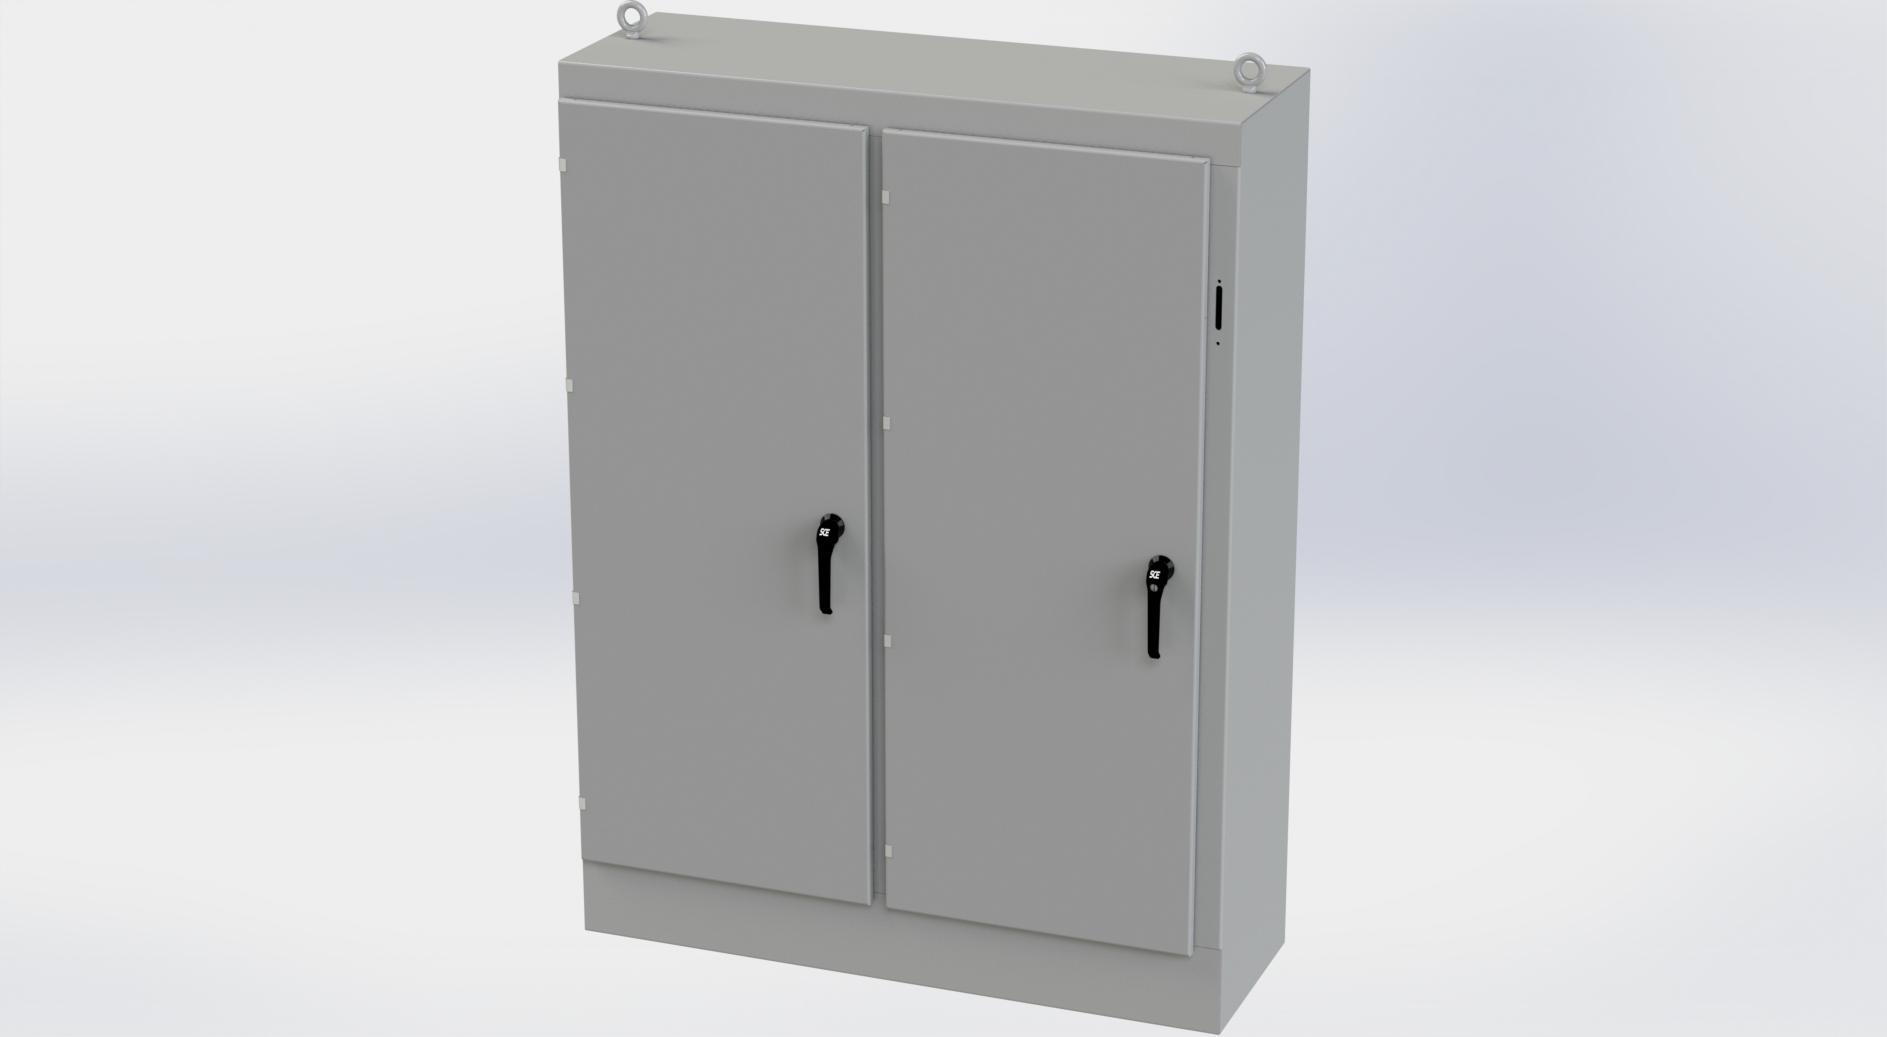 Saginaw Control SCE-72XM5418G 2DR XM Enclosure, Height:72.00", Width:53.75", Depth:18.00", ANSI-61 gray powder coating inside and out. Sub-panels are powder coated white.